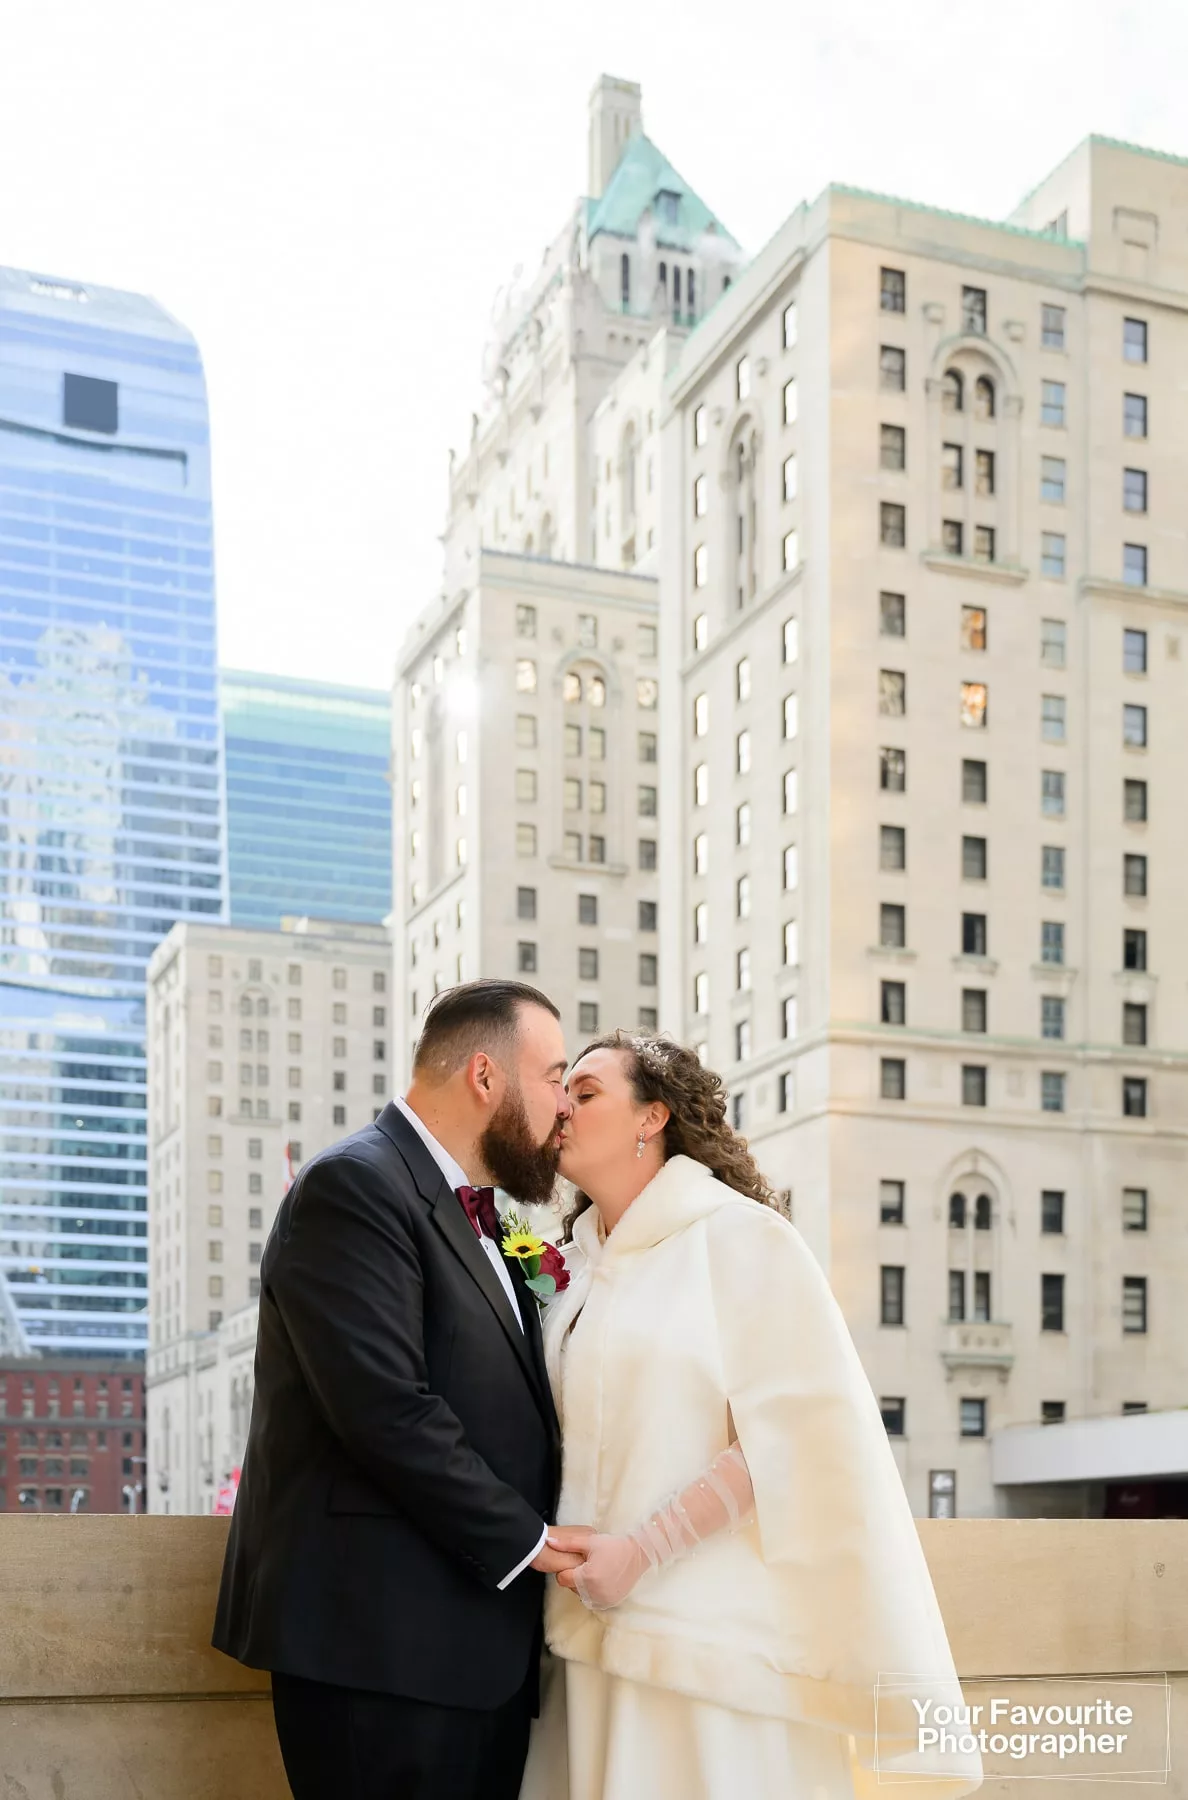 Bride and groom posing in front of Union Station on Front St in downtown Toronto, with the Royal York hotel in the background